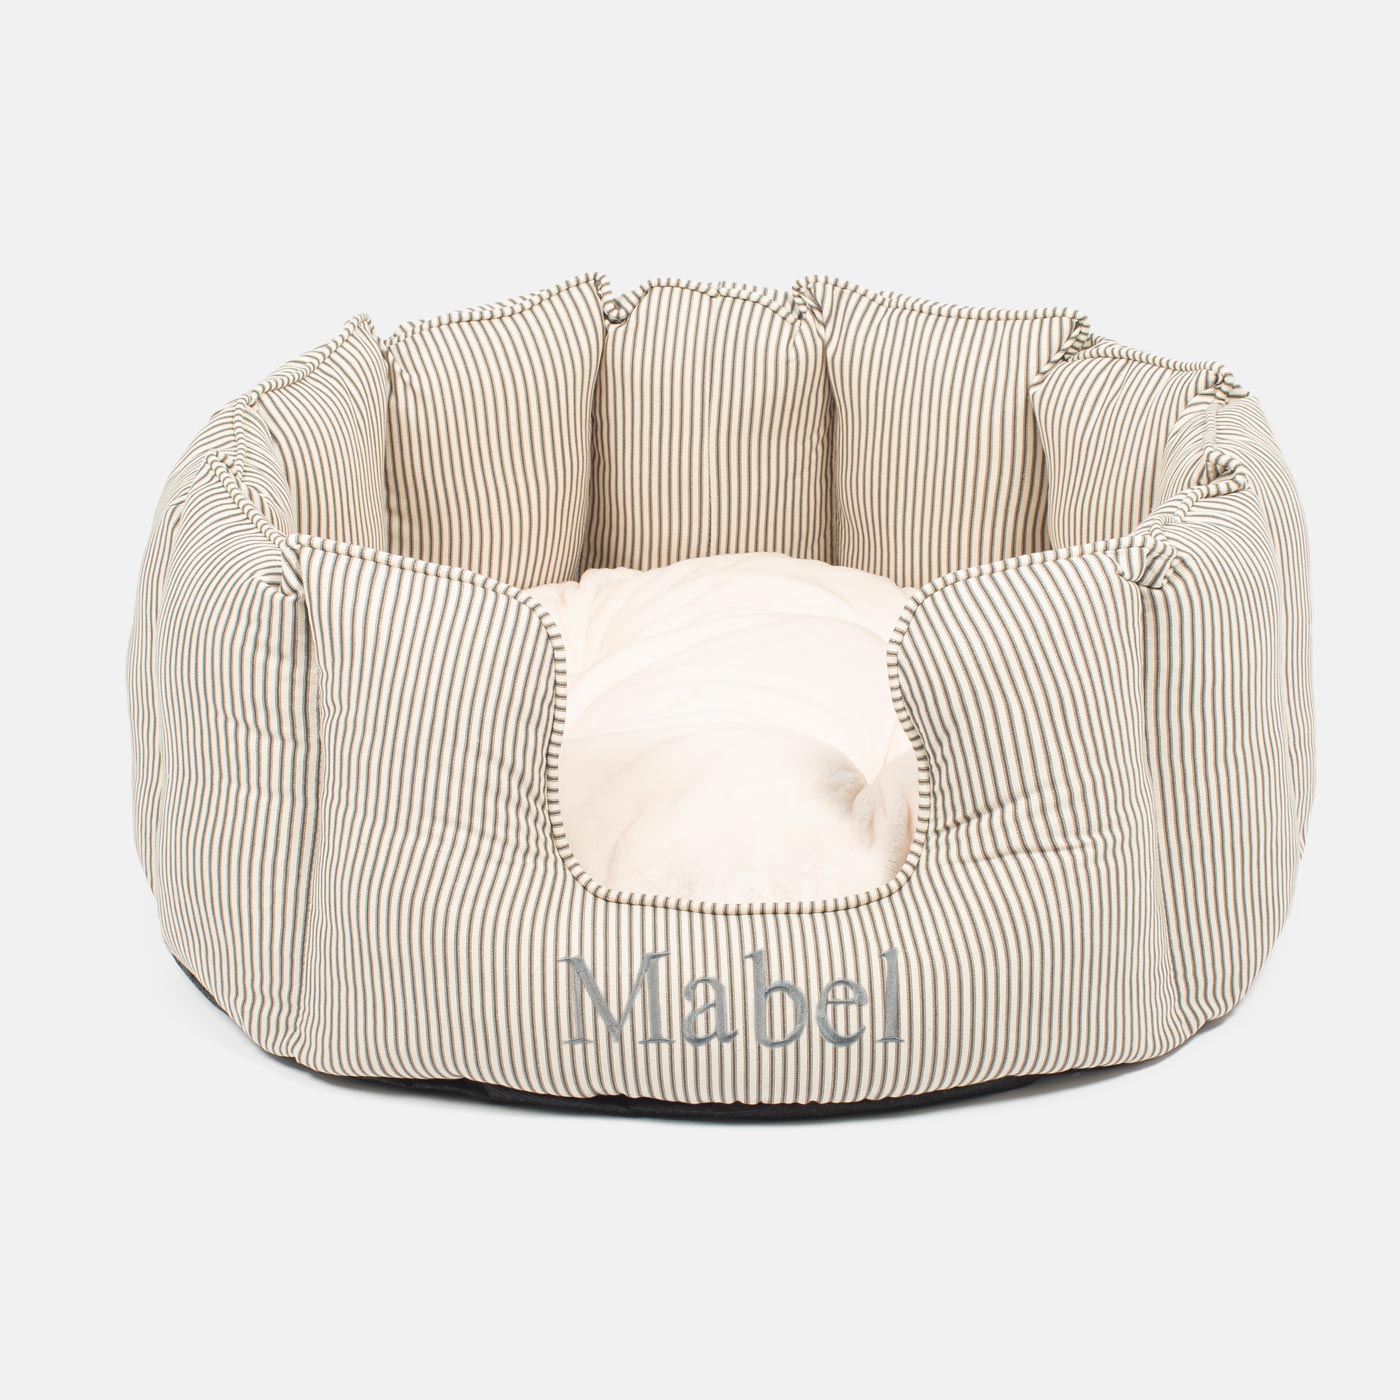 Discover Our Luxurious High Wall Bed For Cats & Kittens, Featuring Reversible Inner Cushion With Teddy Fleece To Craft The Perfect Cat Bed In Stunning Regency Stripe! Available To Personalise Now at Lords & Labradors 